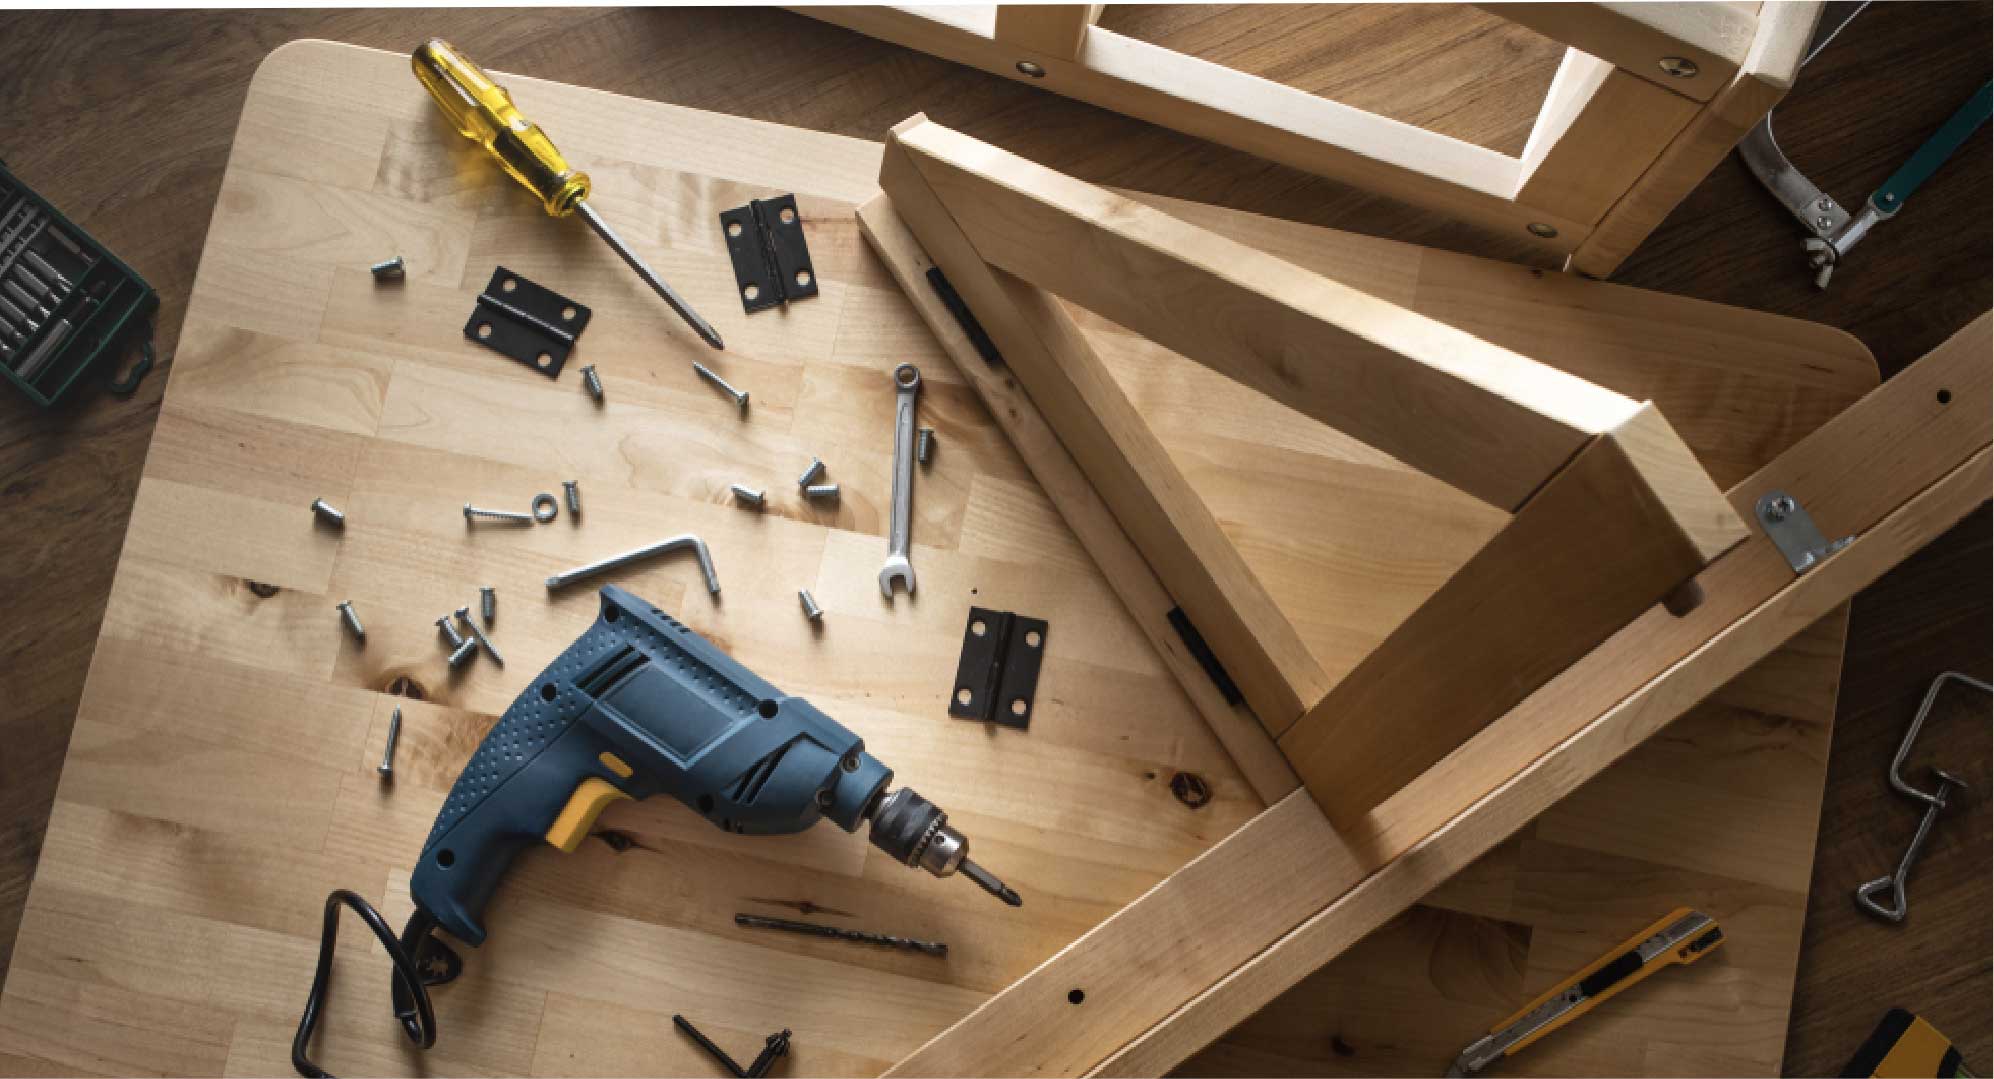 Image of drill and other handyman tools